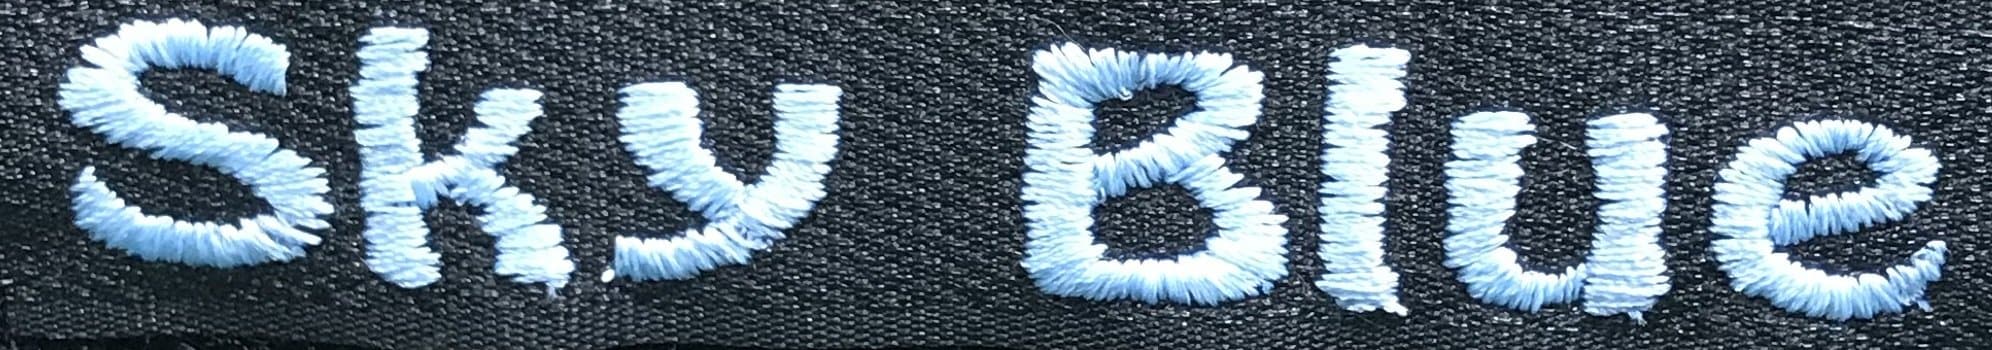 sky blue embroidery example